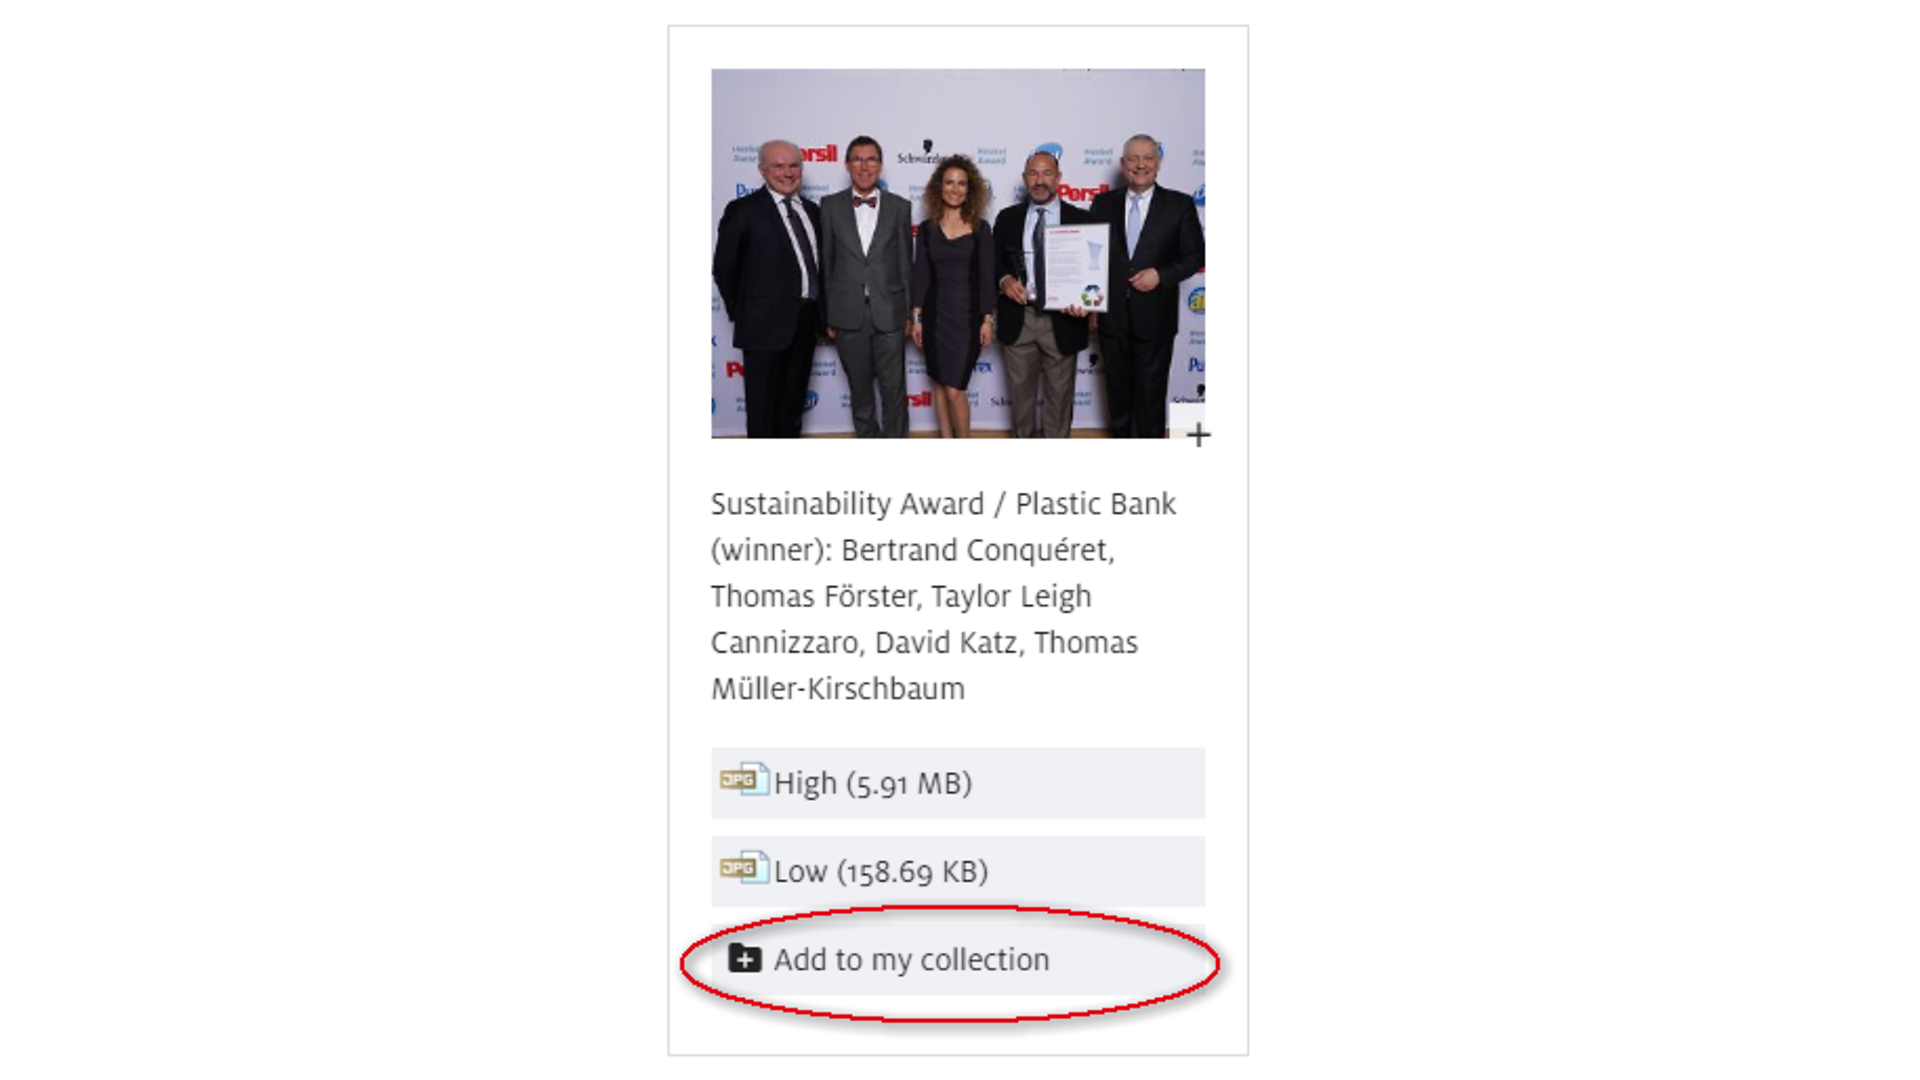 

To add single downloads, images, videos and contacts to your personal collection, directly click on the "Add to my collection" button of the respective element.